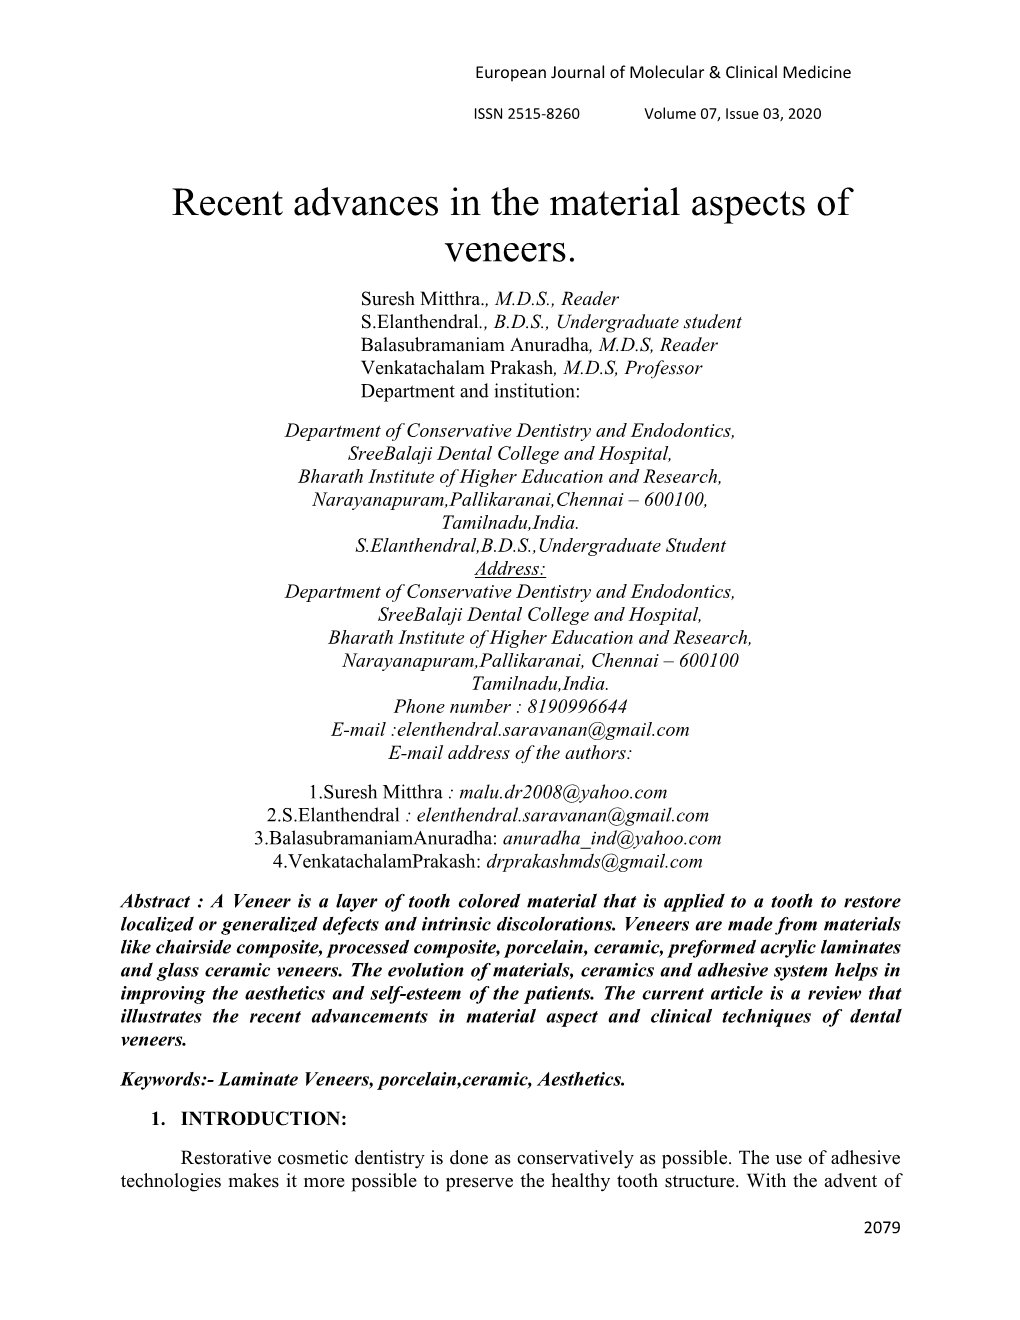 Recent Advances in the Material Aspects of Veneers